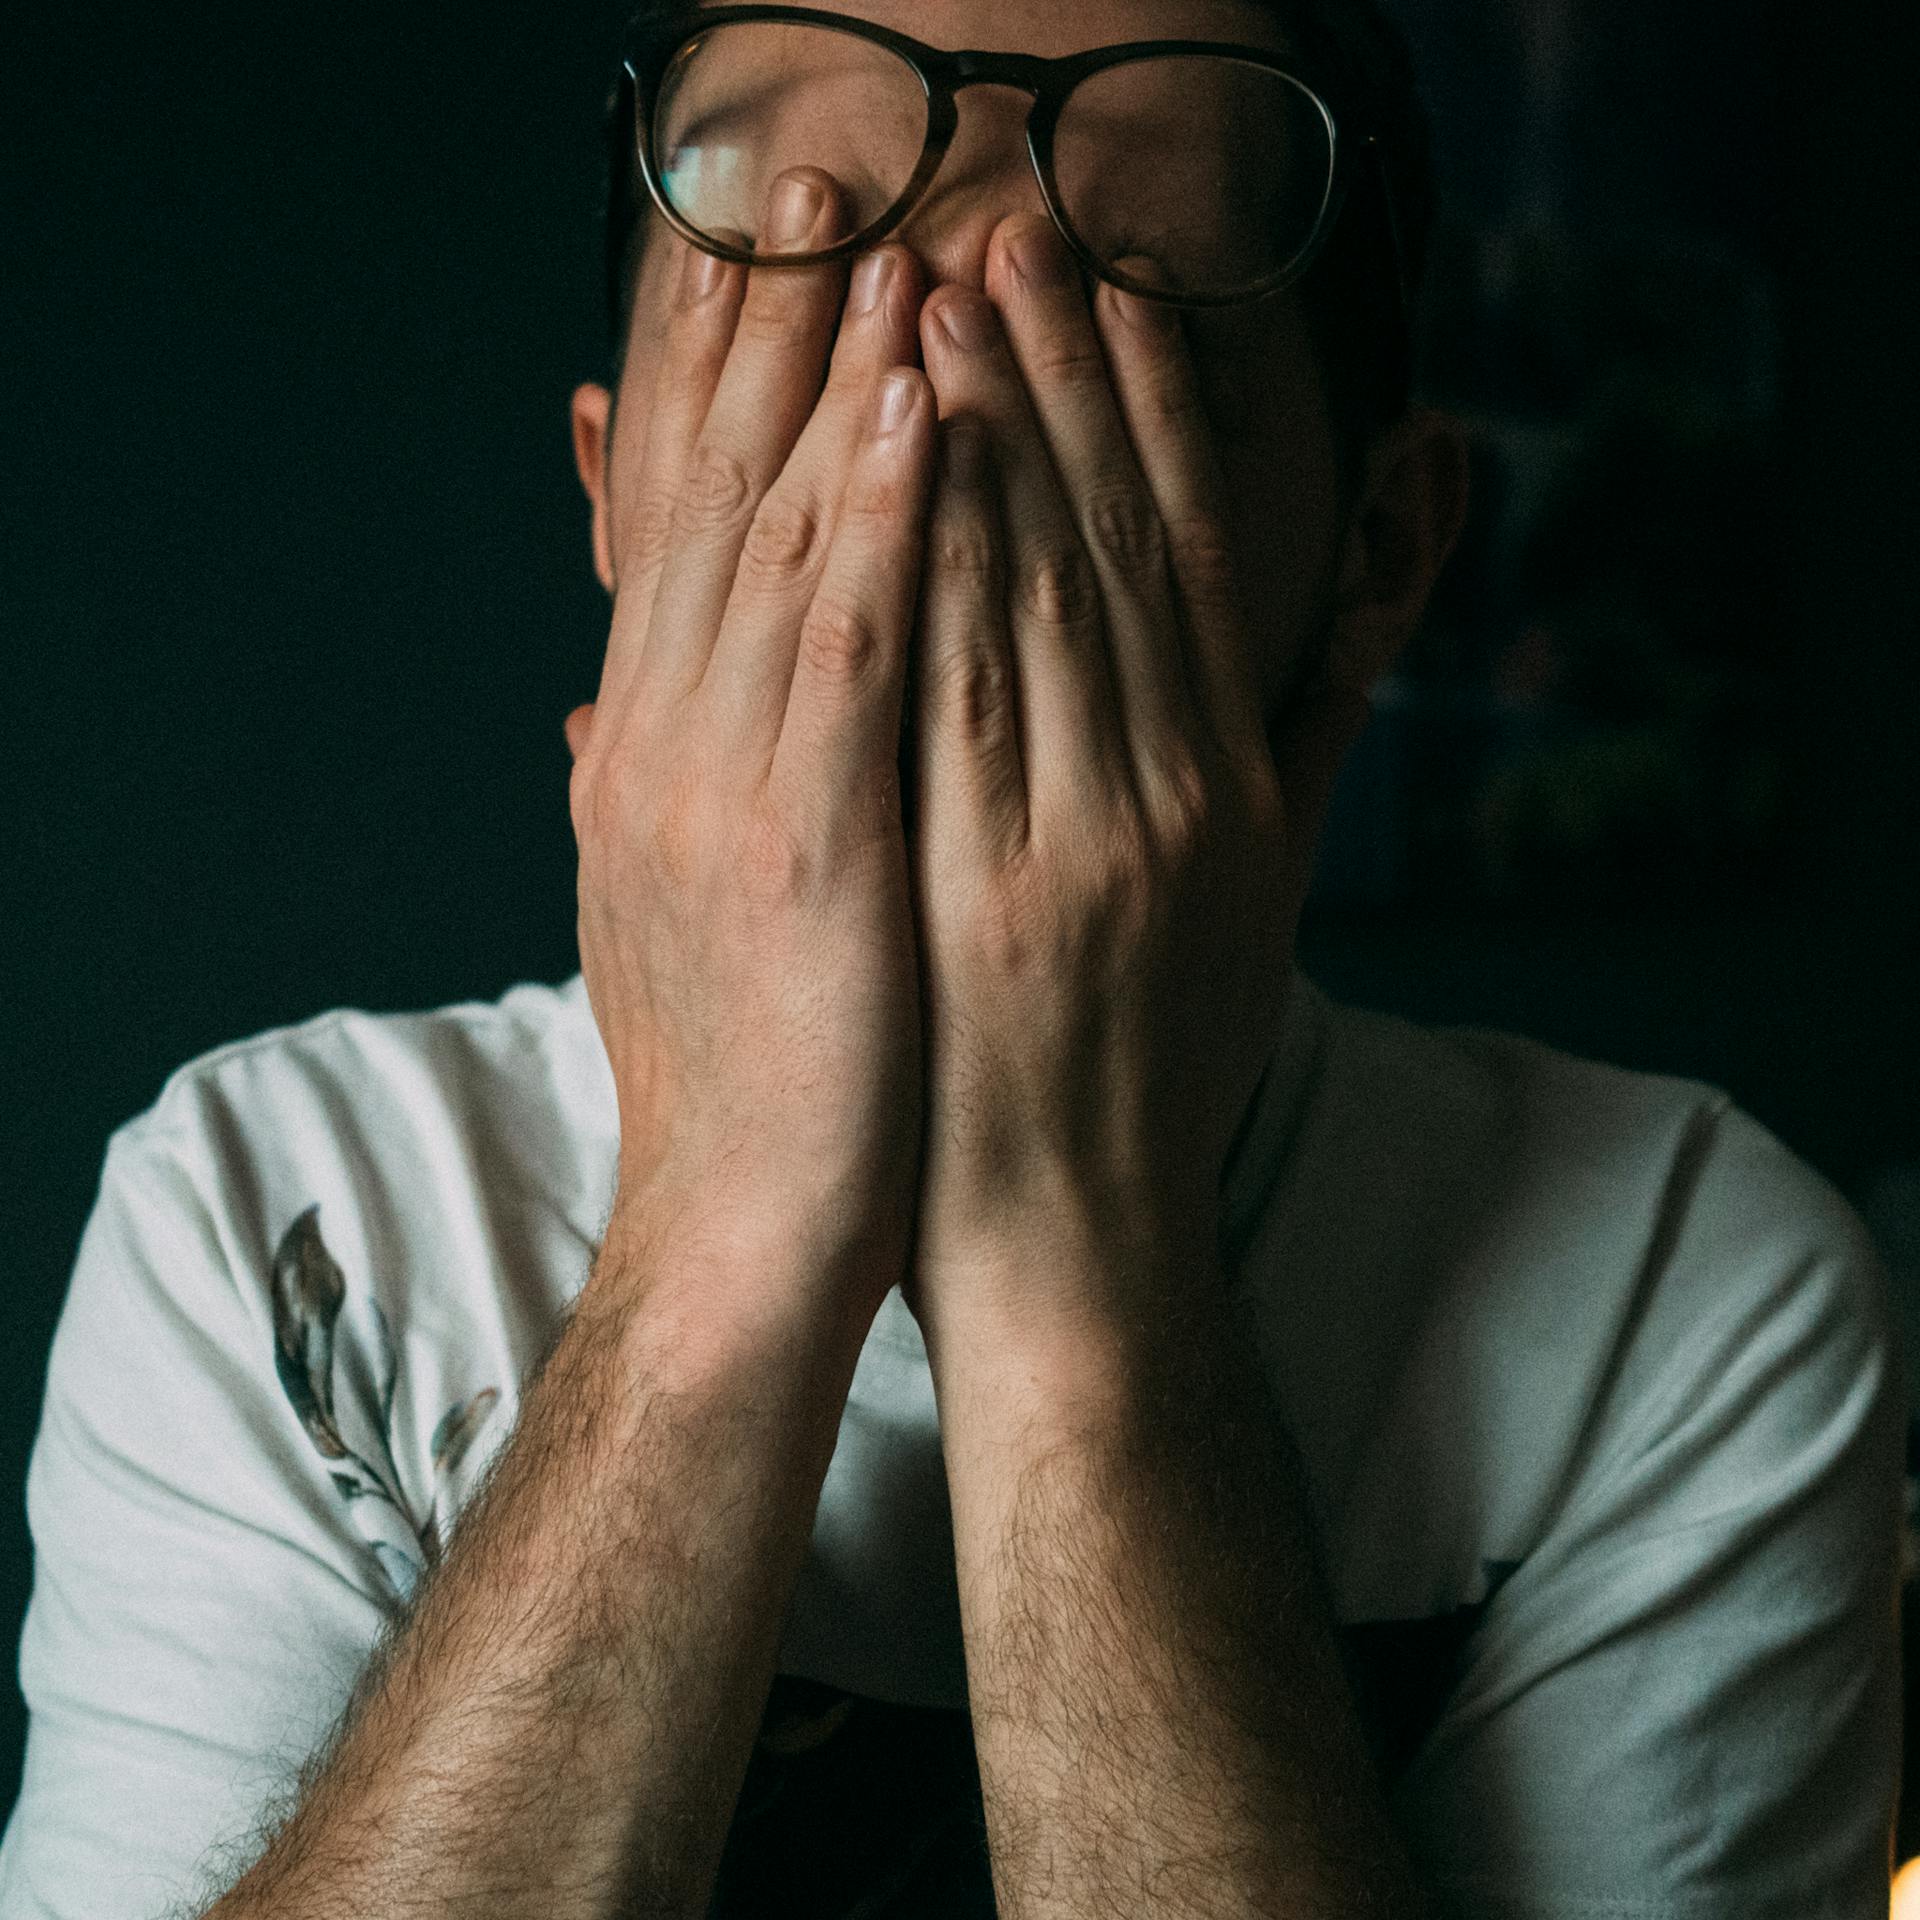 A startled man covering his face | Source: Pexels